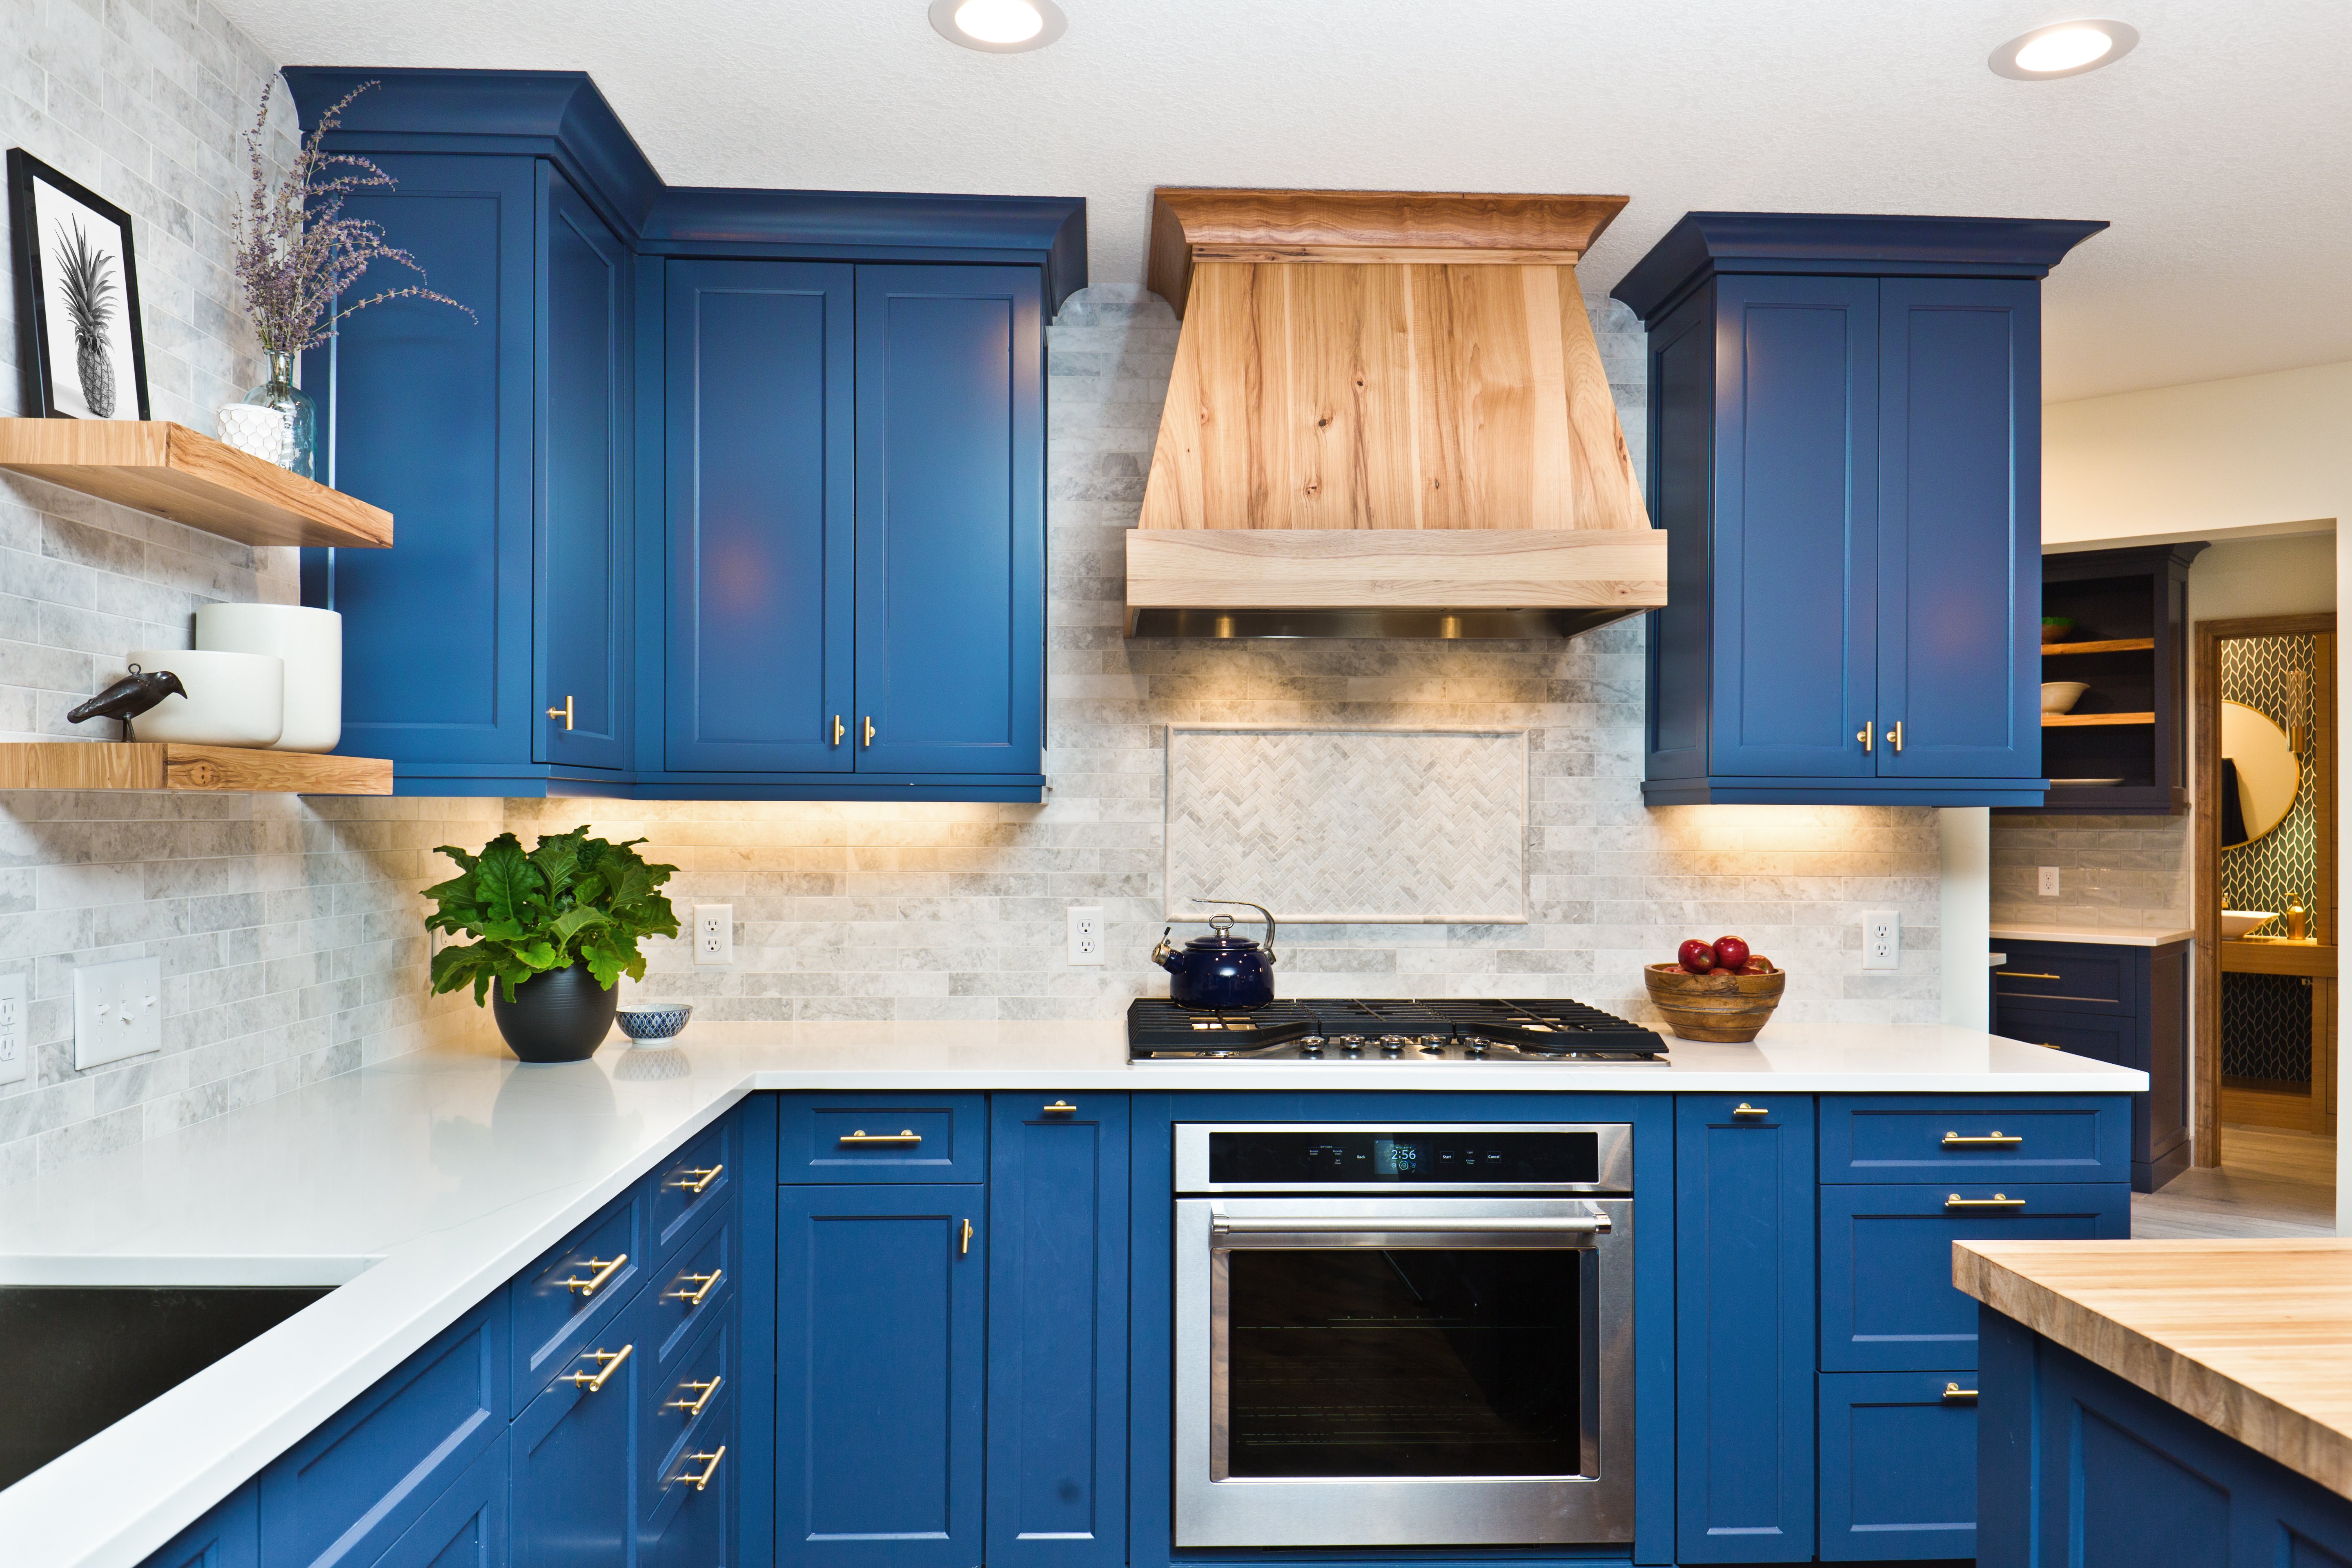 12 kitchens with shaker cabinets to inspire your own:3 Navy blue shaker cabinets with brass hardware.